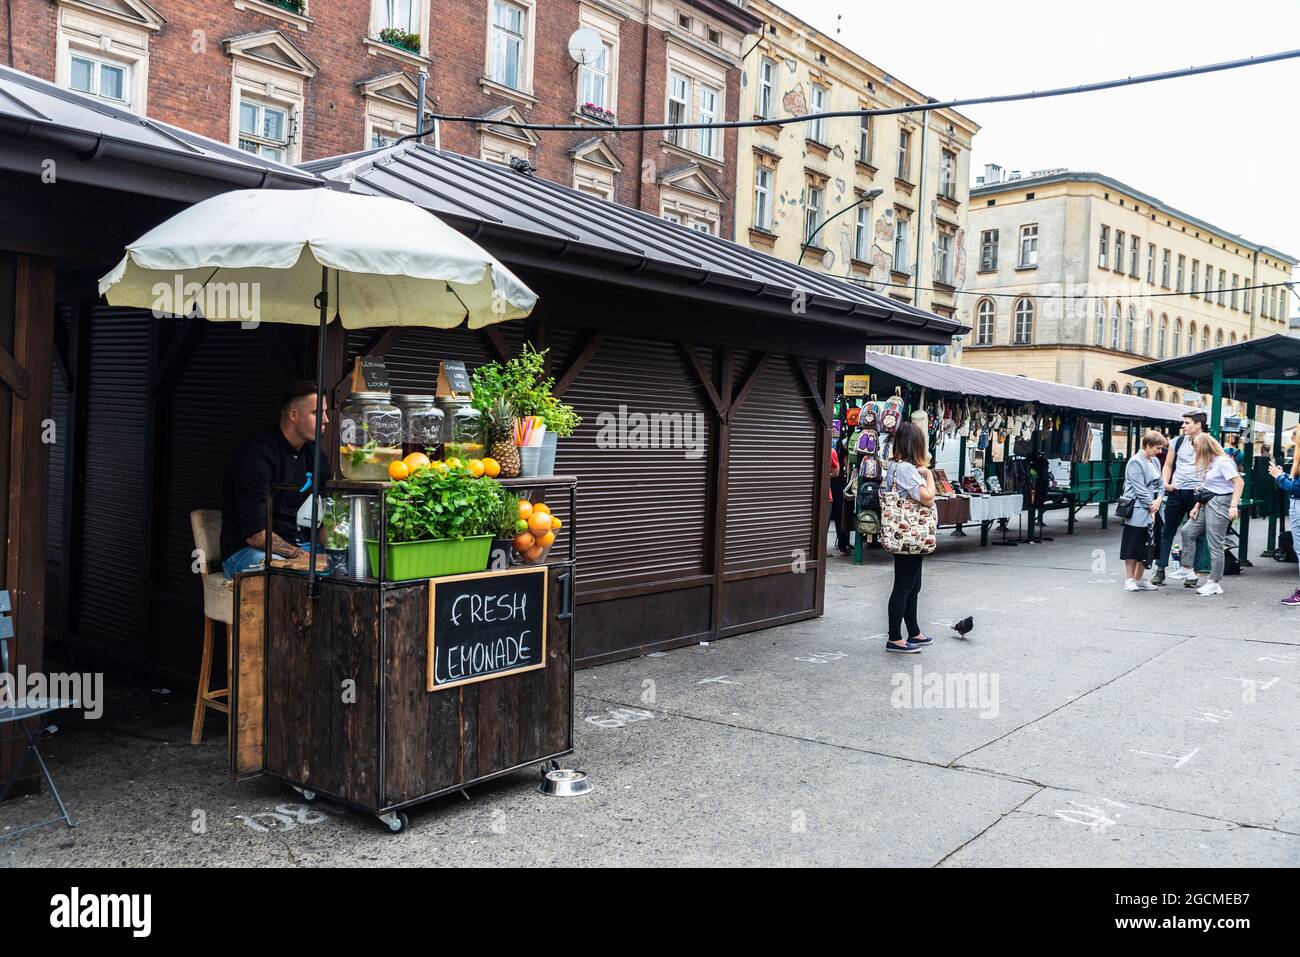 Krakow, Poland - August 28, 2018: Vendor at a fruit juice stand in the flea market of the Plac Nowy that showcase an assortment of antiques in Krakow, Stock Photo